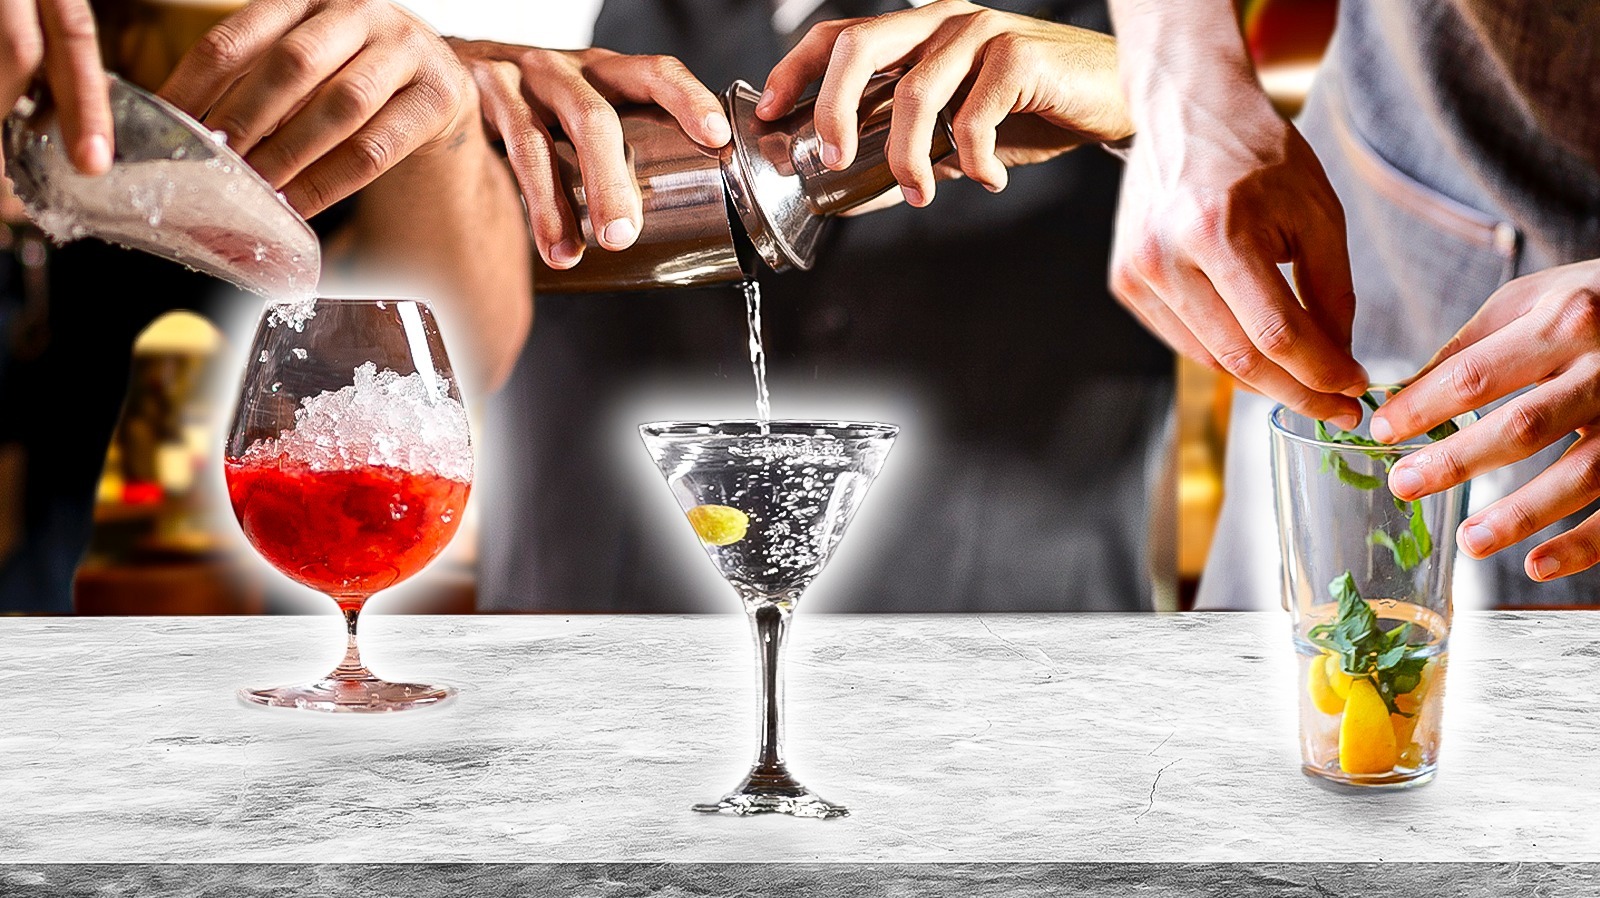 https://www.thedailymeal.com/img/gallery/13-cocktail-making-hacks-that-are-sure-to-make-life-easier/l-intro-1687791579.jpg